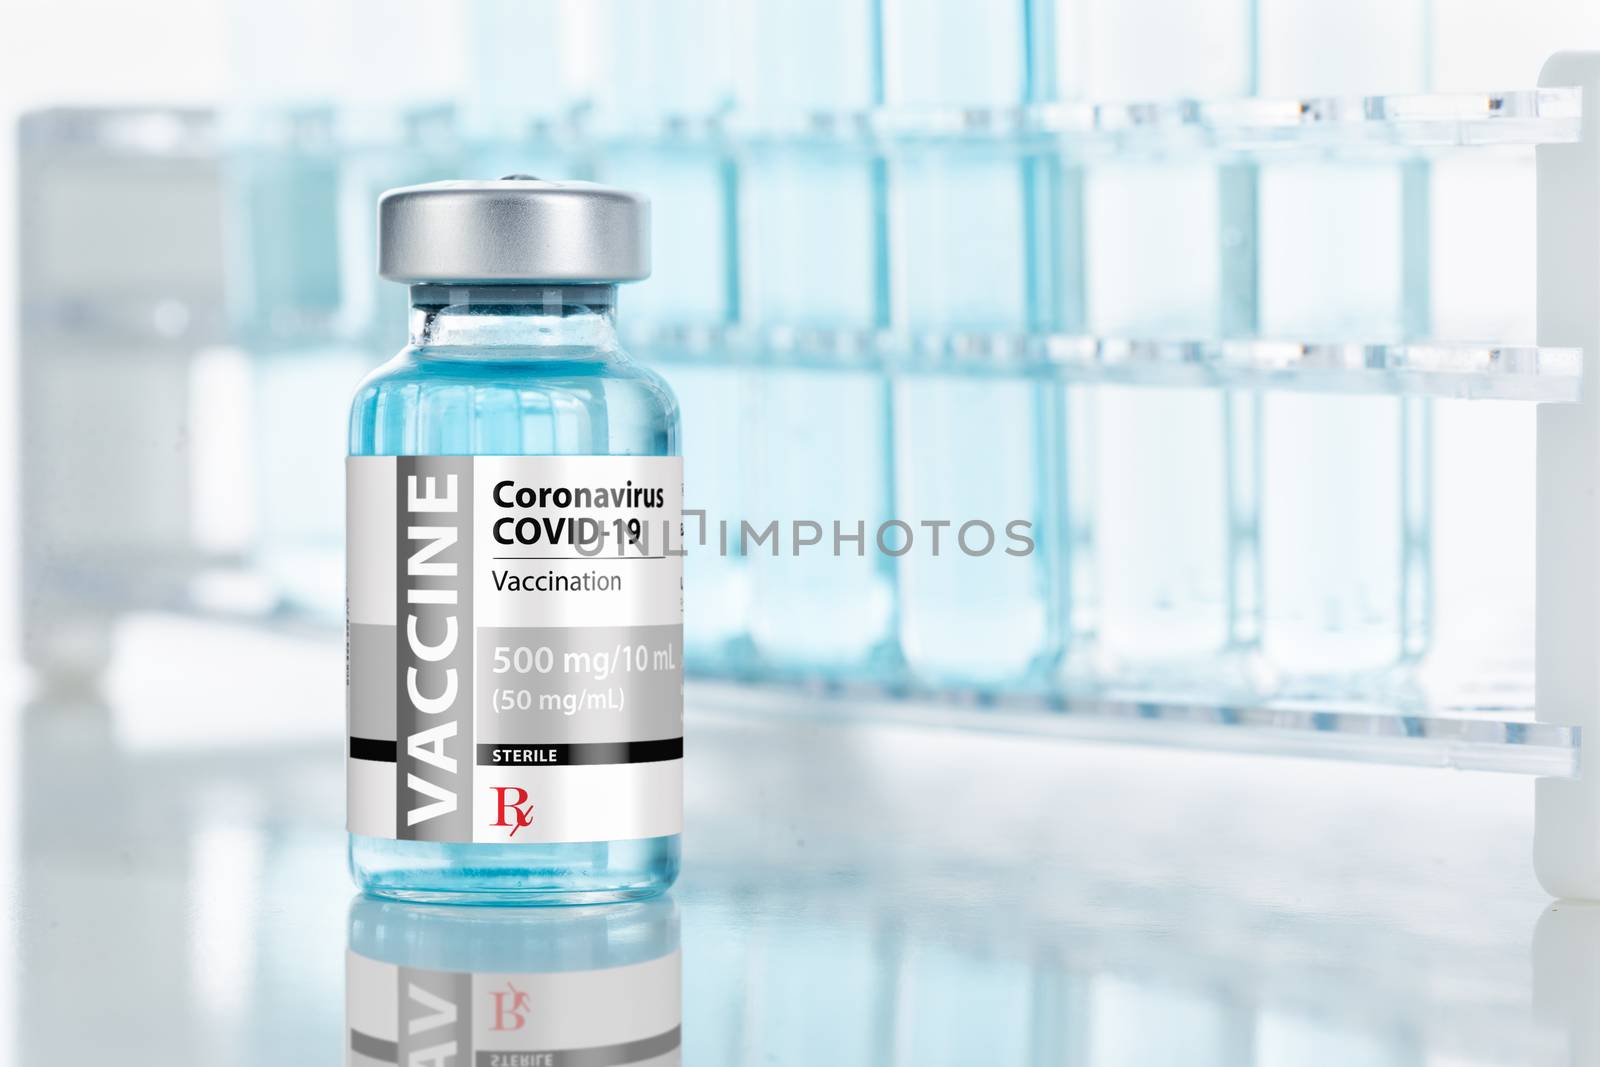 Coronavirus COVID-19 Vaccine Vial Near Test Tubes On Reflective  by Feverpitched